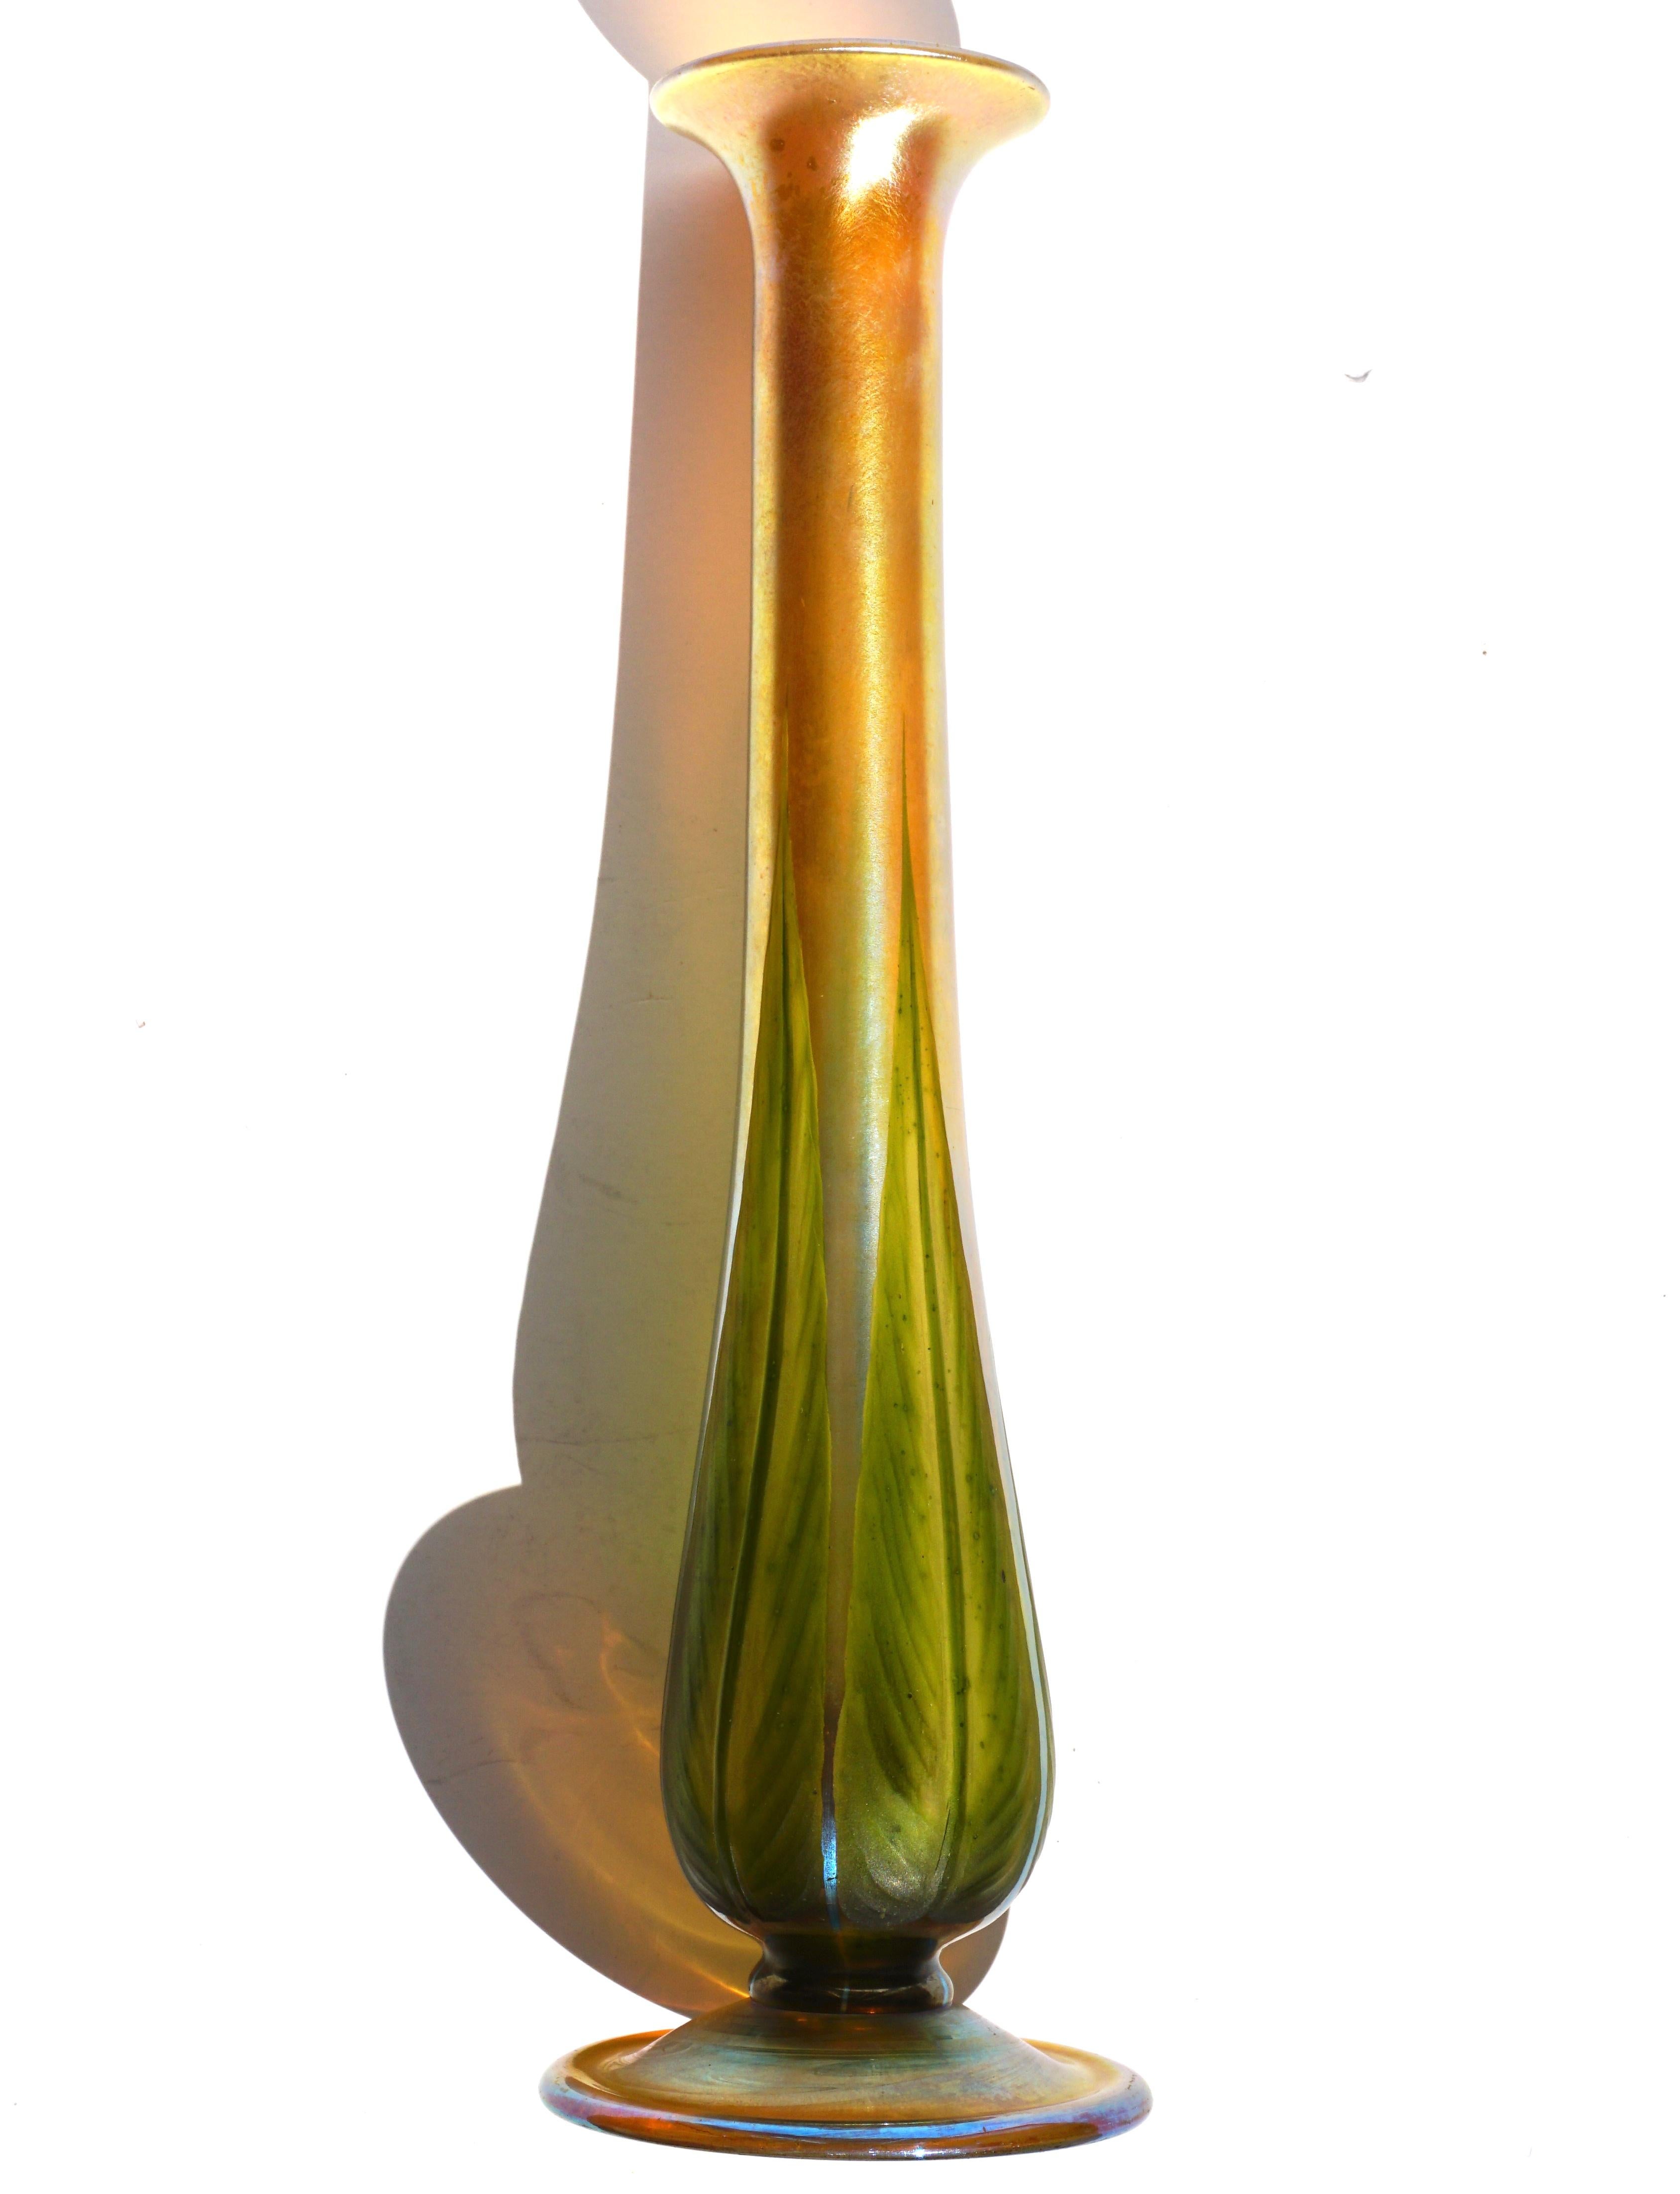 American Tall Wheel Carved Decorated Tiffany Studios Gold and Green Favrile Vase For Sale